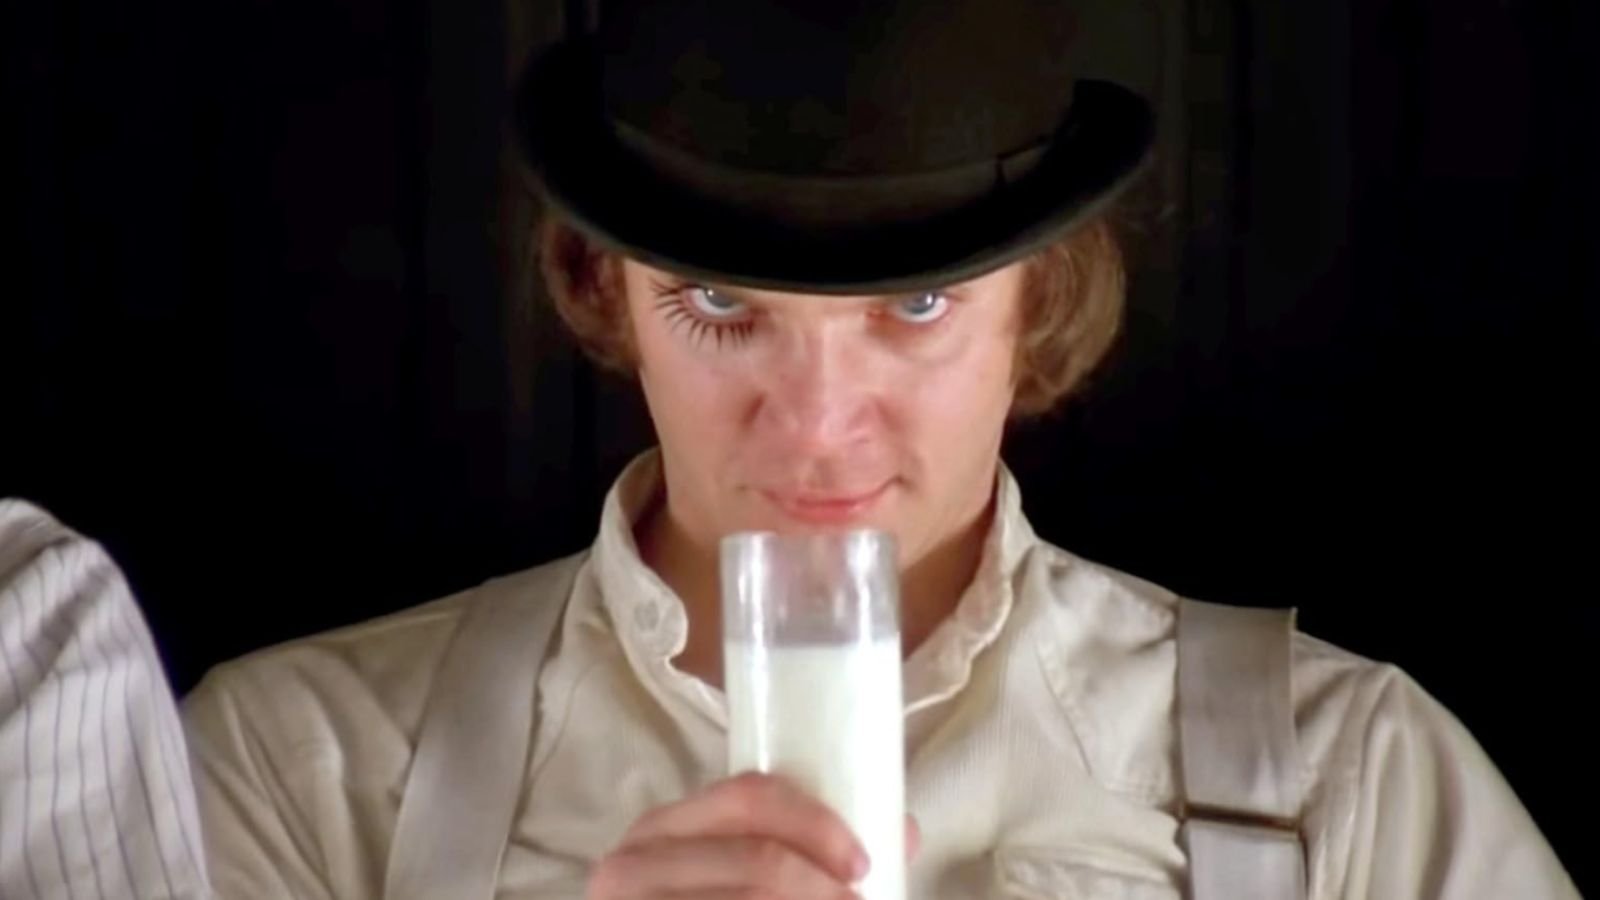 <p><span> Burgess’s unsettling vision of a future London, overrun by youth gangs and violent crime, made readers shudder. But Kubrick’s film adaptation? It was a real experience. The stark contrast of the droogs’ white outfits, the unnerving use of classical music during acts of violence, and Malcolm McDowell’s chilling portrayal of Alex kept viewers on edge long after the credits rolled.</span></p>